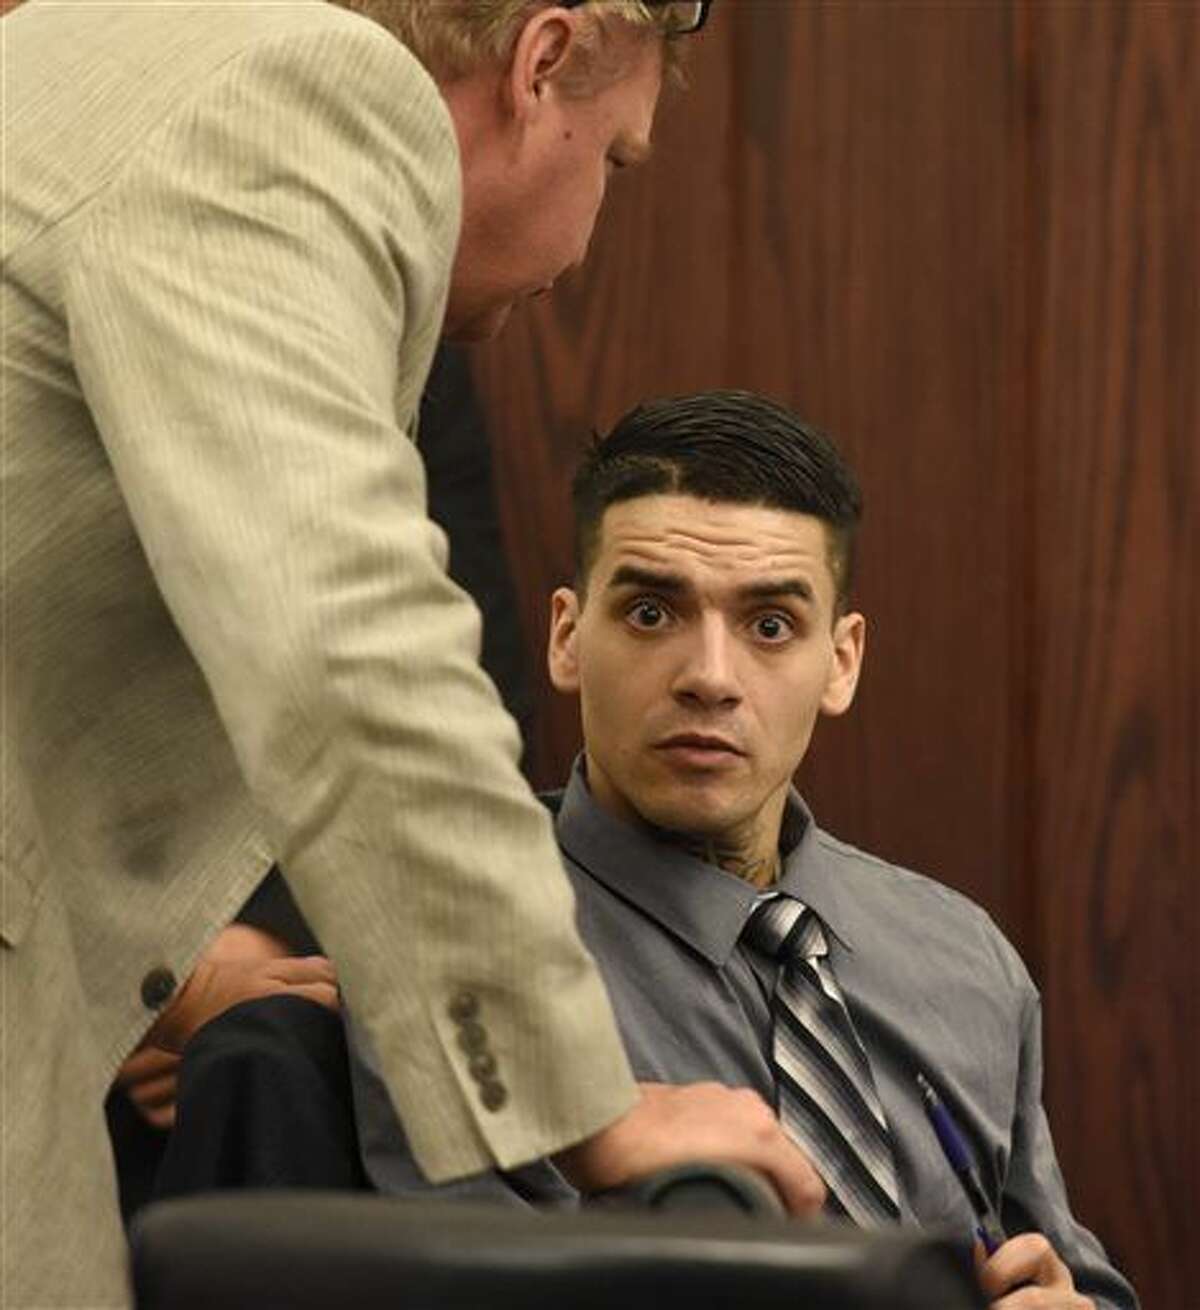 Suspect Andrew Romero appears during the first day of testimony in his trial in Los Lunas, N.M., Thursday, Sept. 8, 2016. Romero is on trial for the shooting death of Rio Rancho Officer Gregg "Nigel" Benner, who shot and killed after making a traffic stop in an Albuquerque suburb. (Dean Hanson/The Albuquerque Journal via AP)